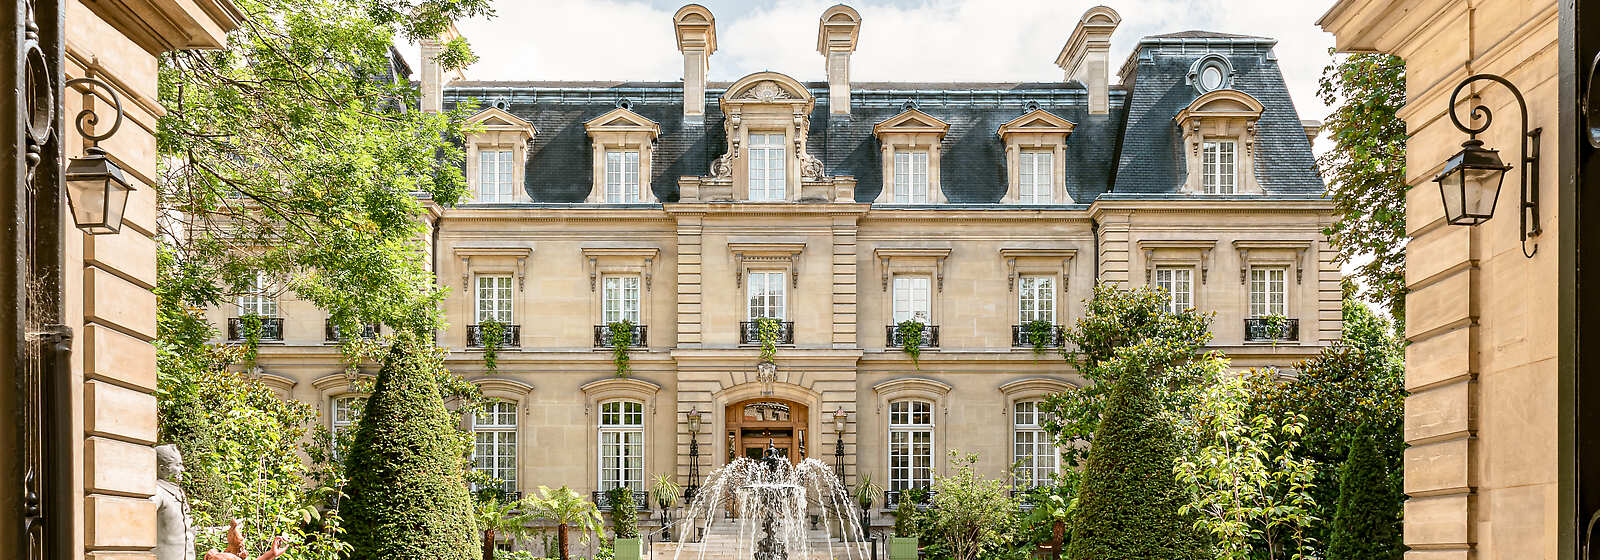 The majestic Saint James Paris, tucked awain in its private garden.